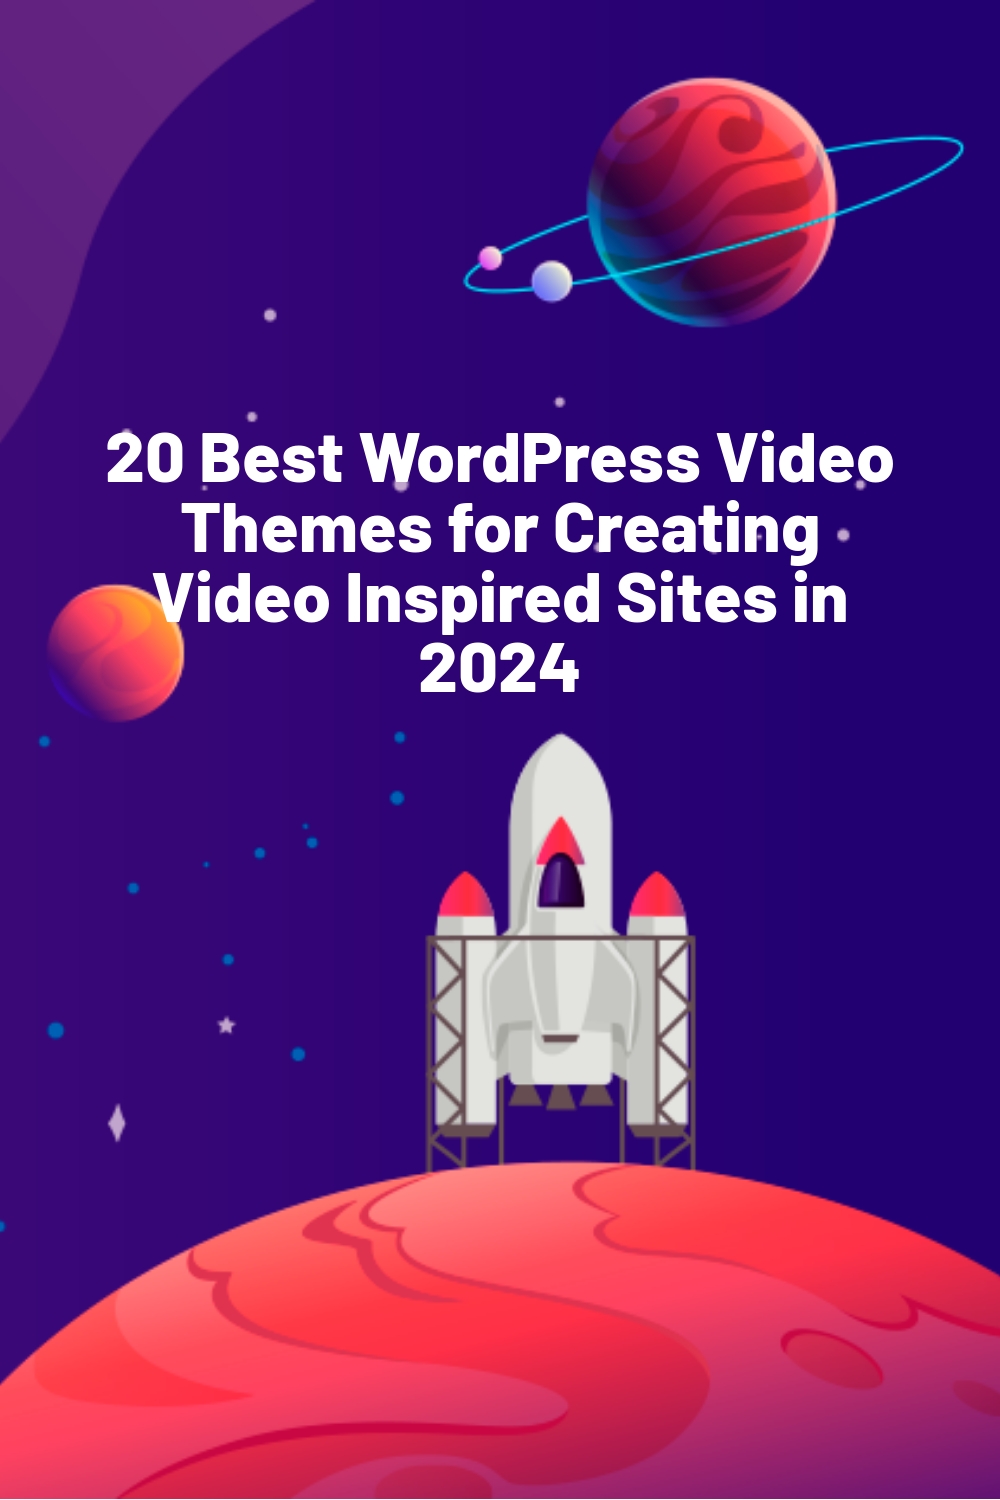 20 Best WordPress Video Themes for Creating Video Inspired Sites in 2024